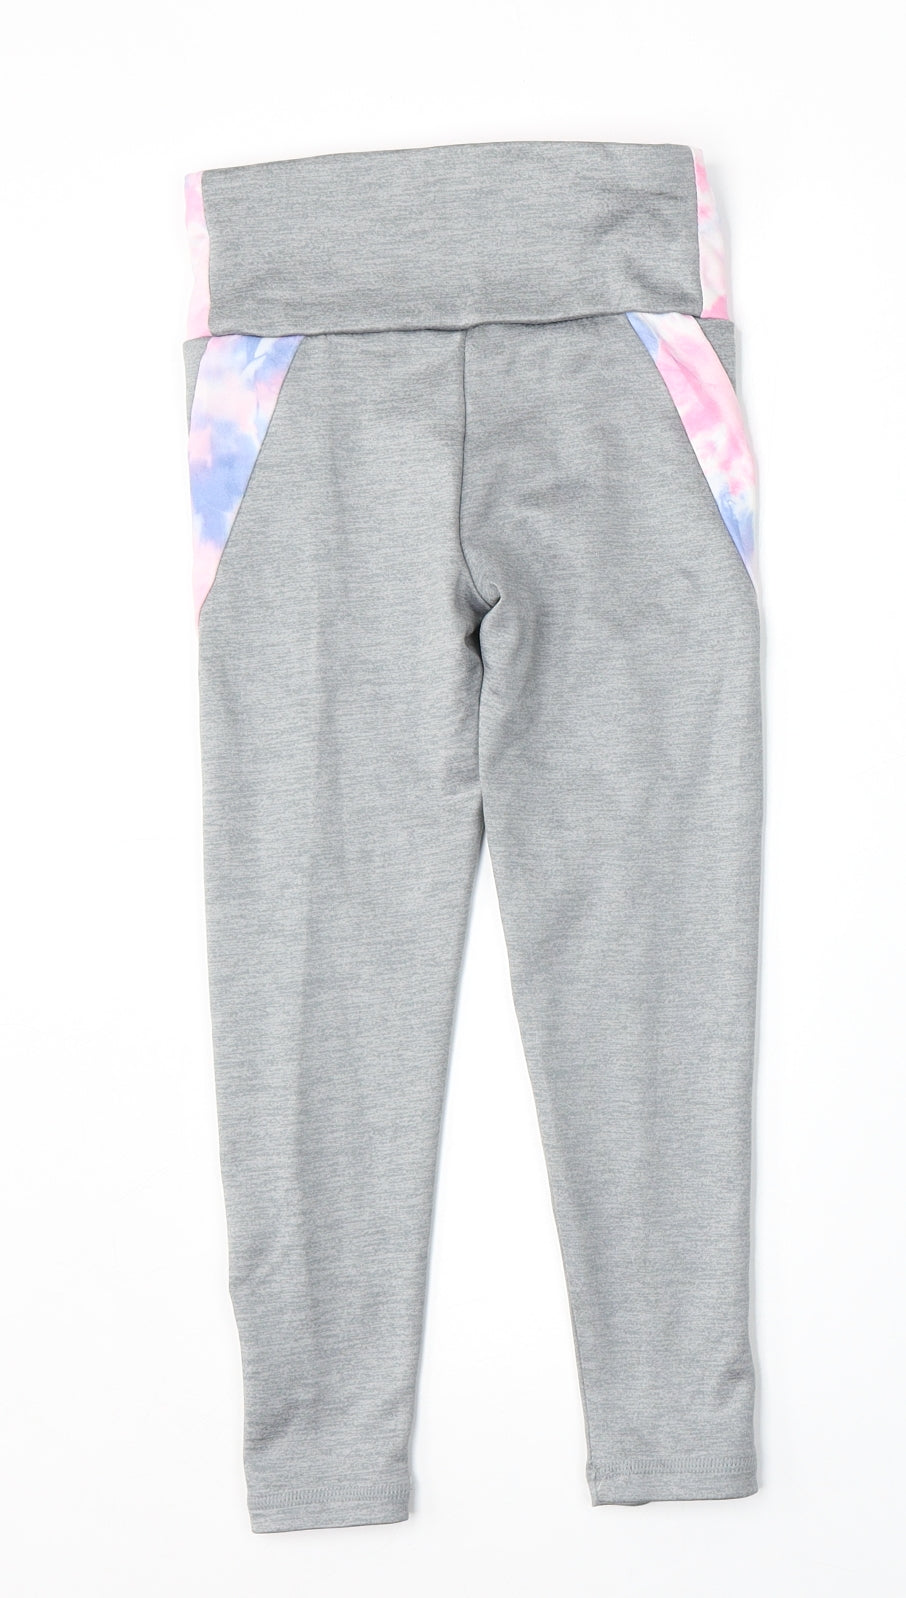 Primark Girls Grey  Polyester Jogger Trousers Size 7-8 Years  Regular